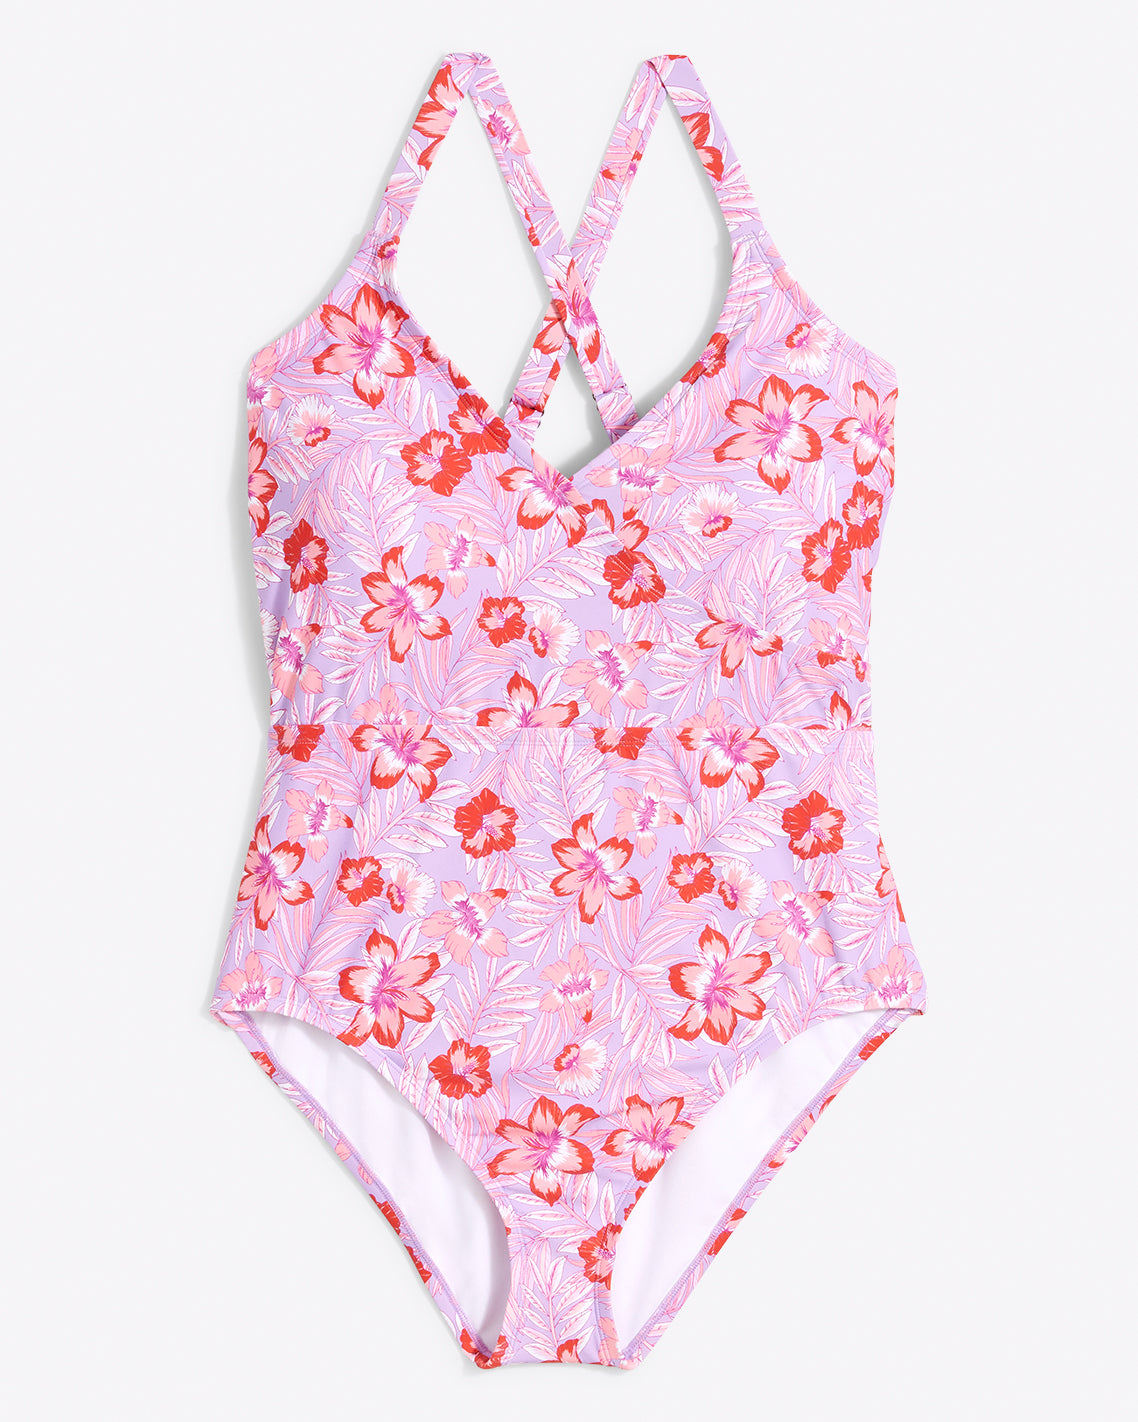 Smocked One Piece - Floral Fever  One piece, Scalloped one piece